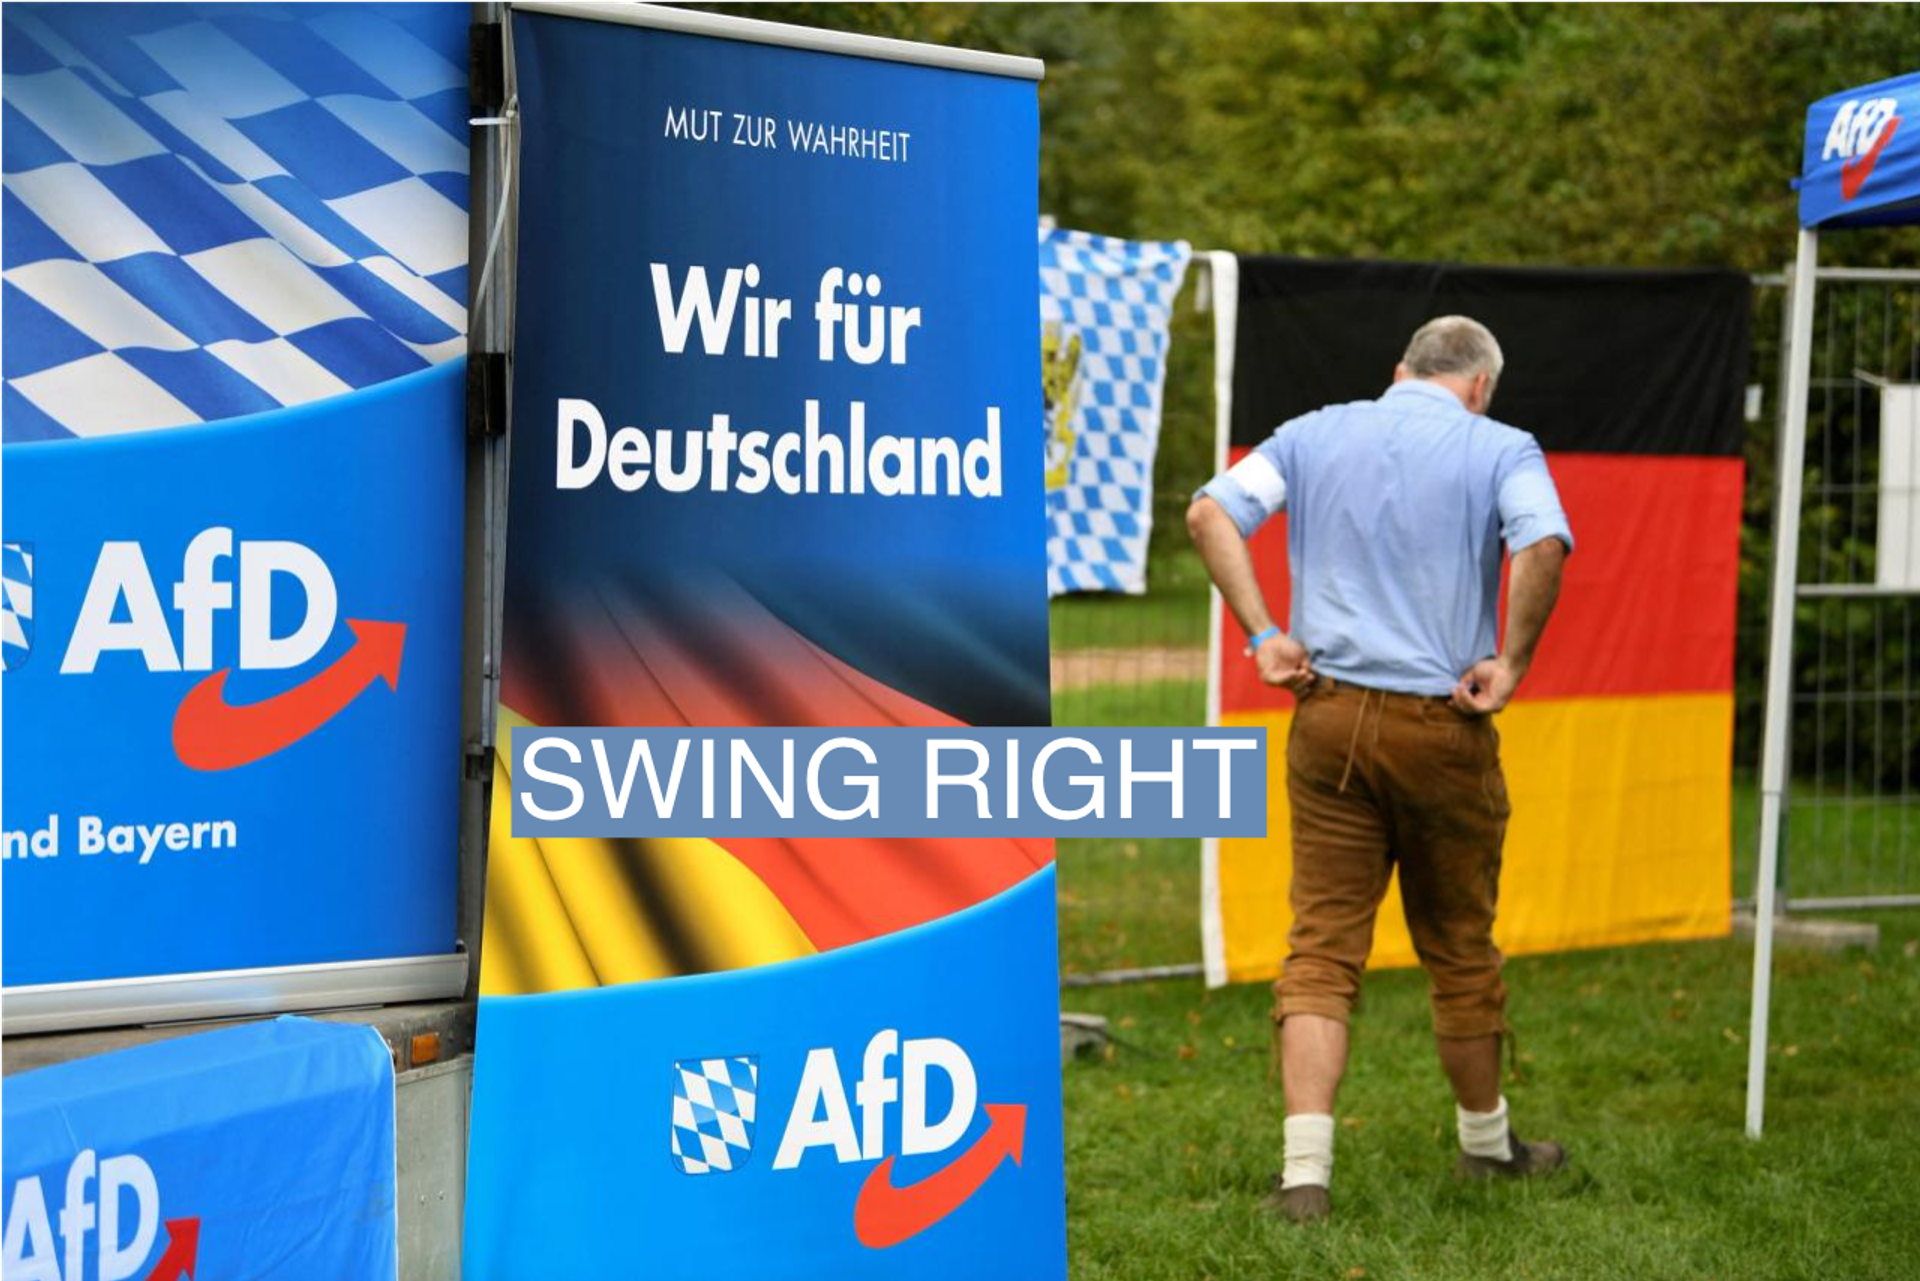 AfD in Germany